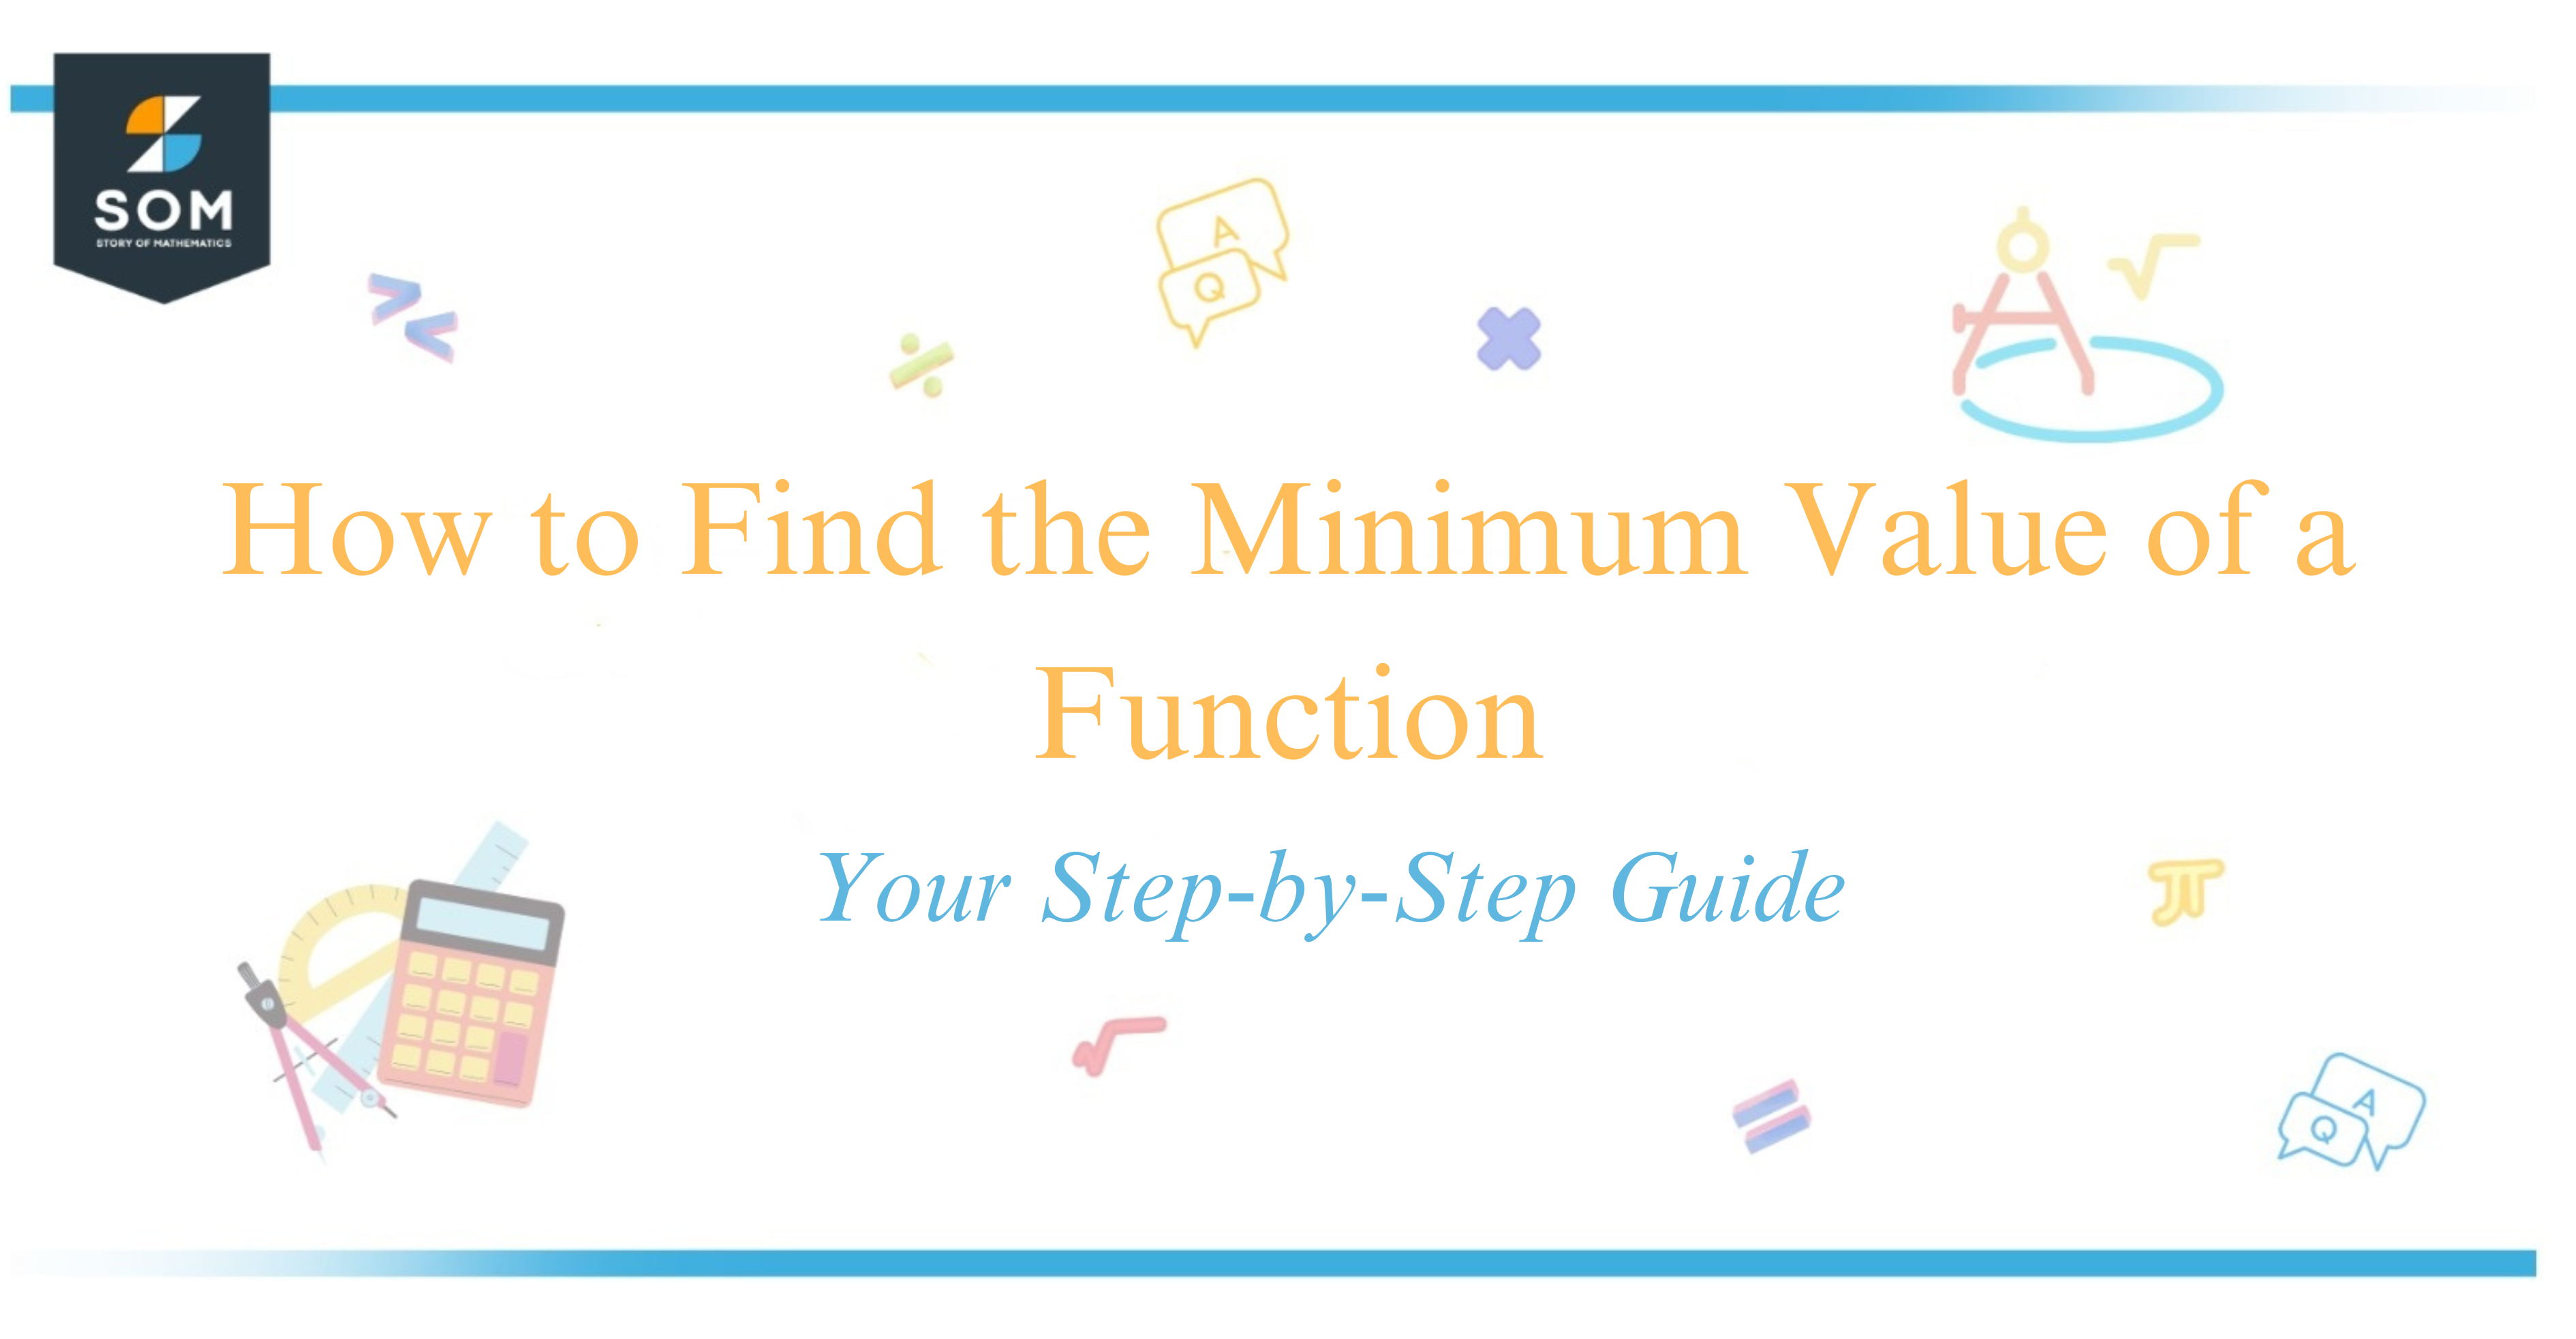 How to Find the Minimum Value of a Function Your Step-by-Step Guide